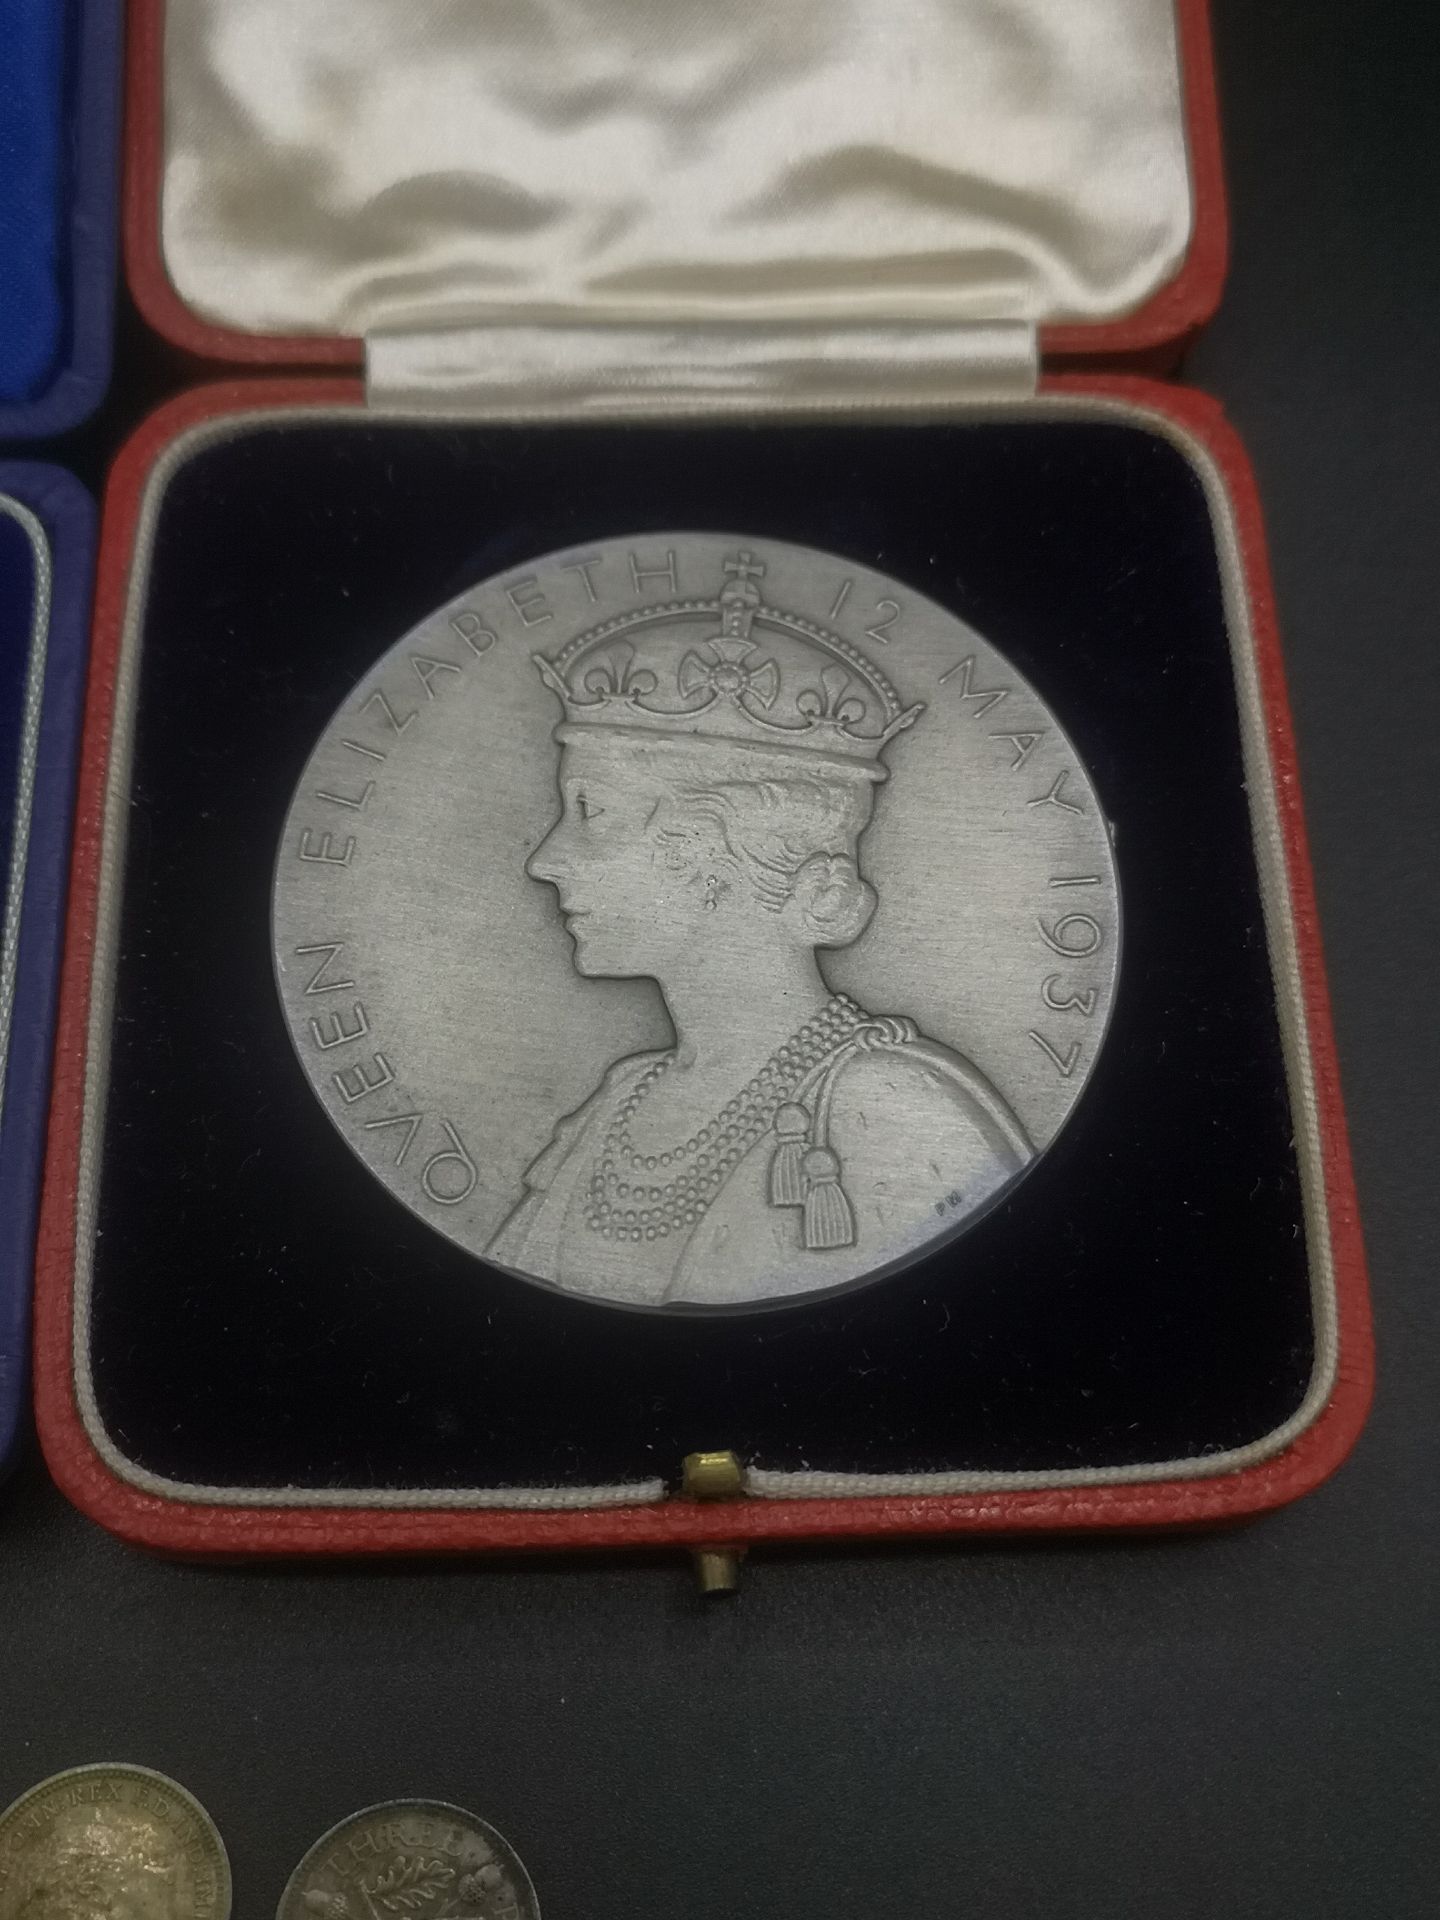 A Brokers' Medal, two other medals and coins - Image 5 of 5